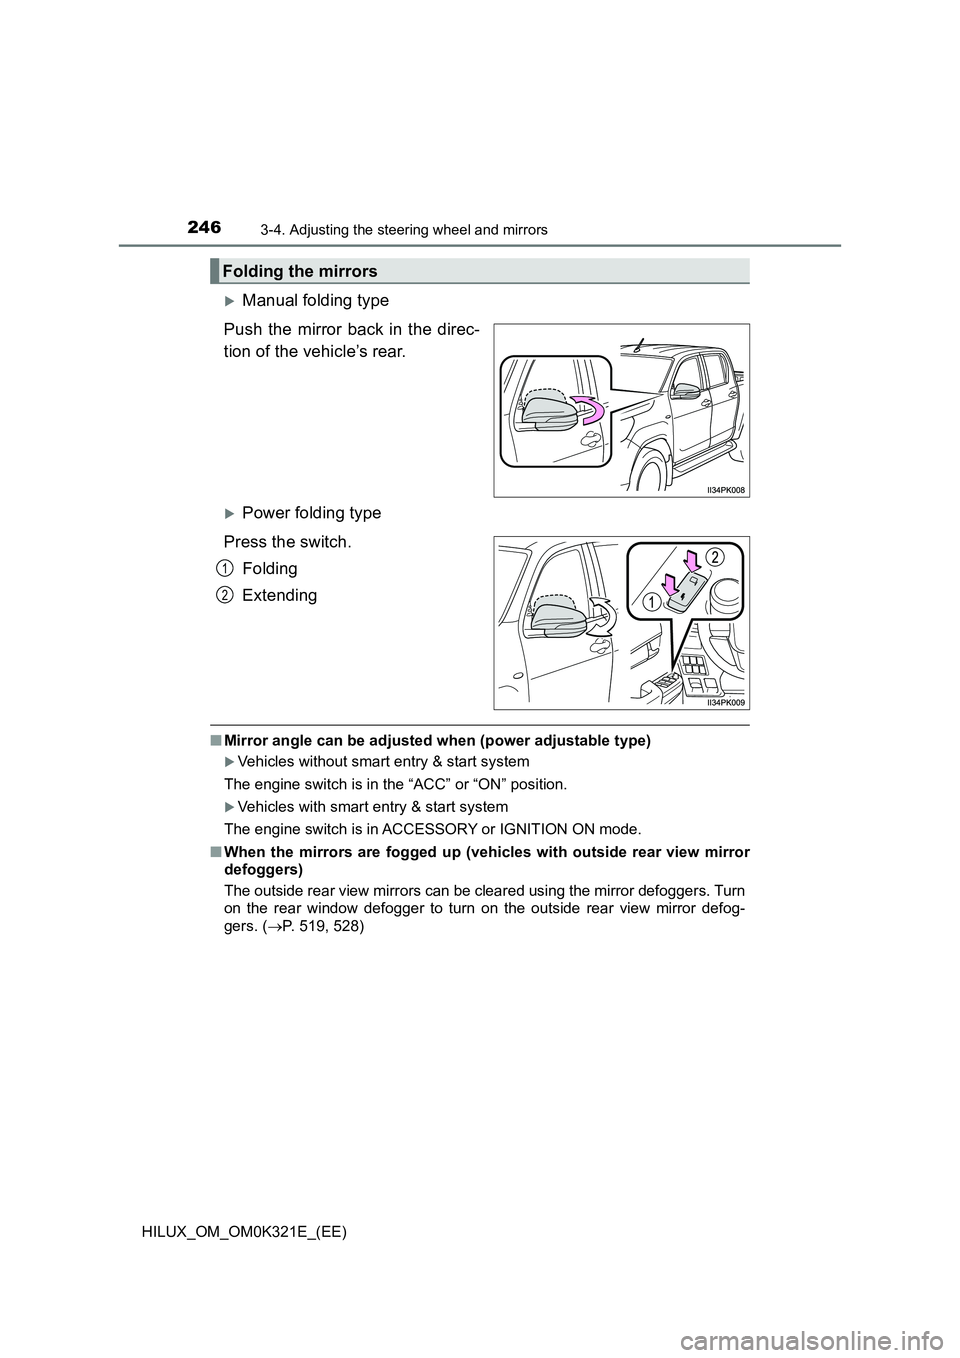 TOYOTA HILUX 2020   (in English) User Guide 2463-4. Adjusting the steering wheel and mirrors
HILUX_OM_OM0K321E_(EE)
Manual folding type 
Push the mirror back in the direc- 
tion of the vehicle’s rear. 
Power folding type 
Press the swit